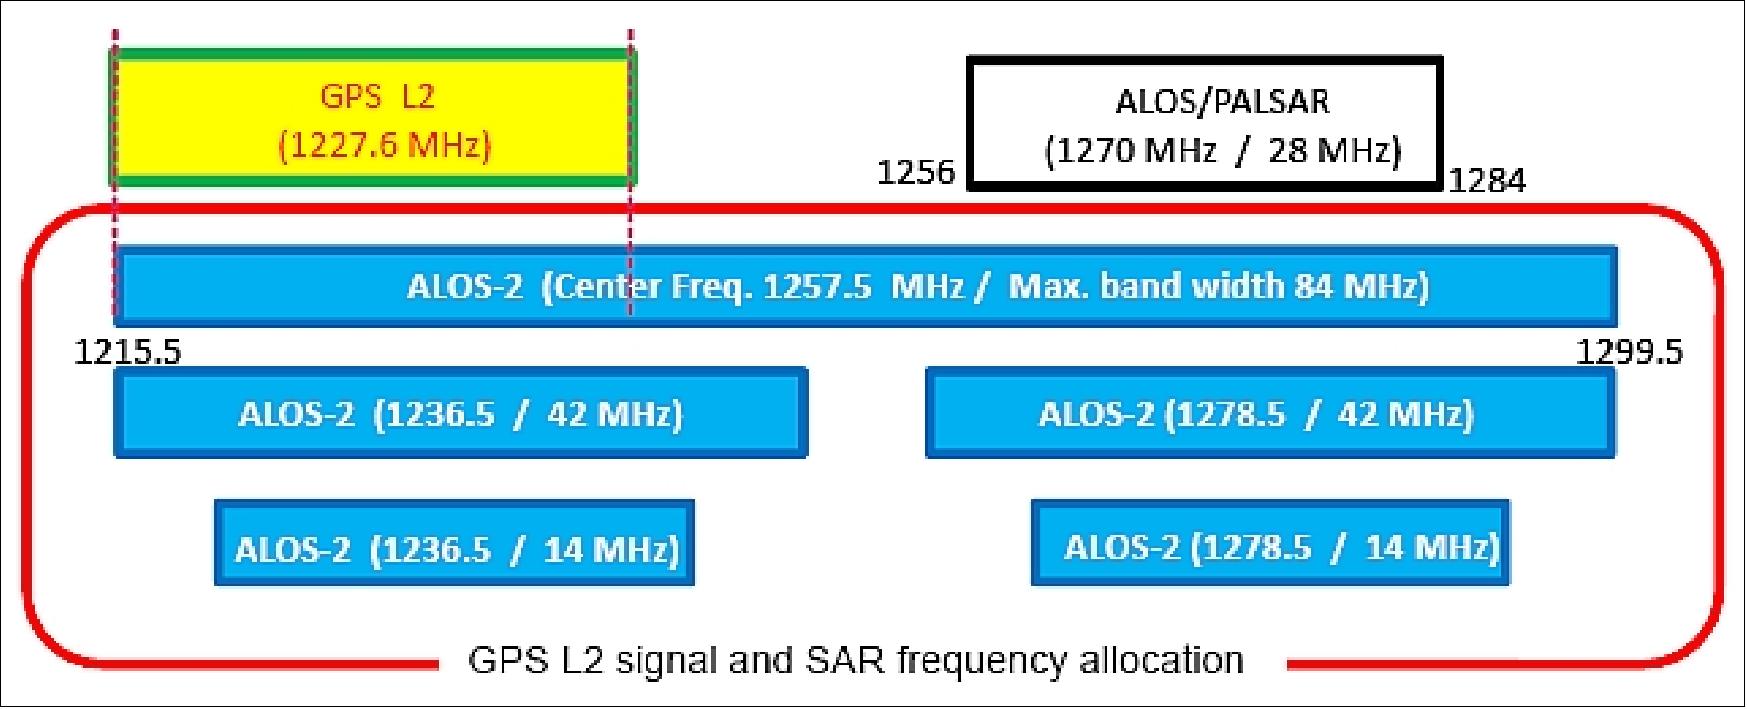 Figure 3: GPS L2 signal and SAR frequency allocation used in ALOS and ALOS-2